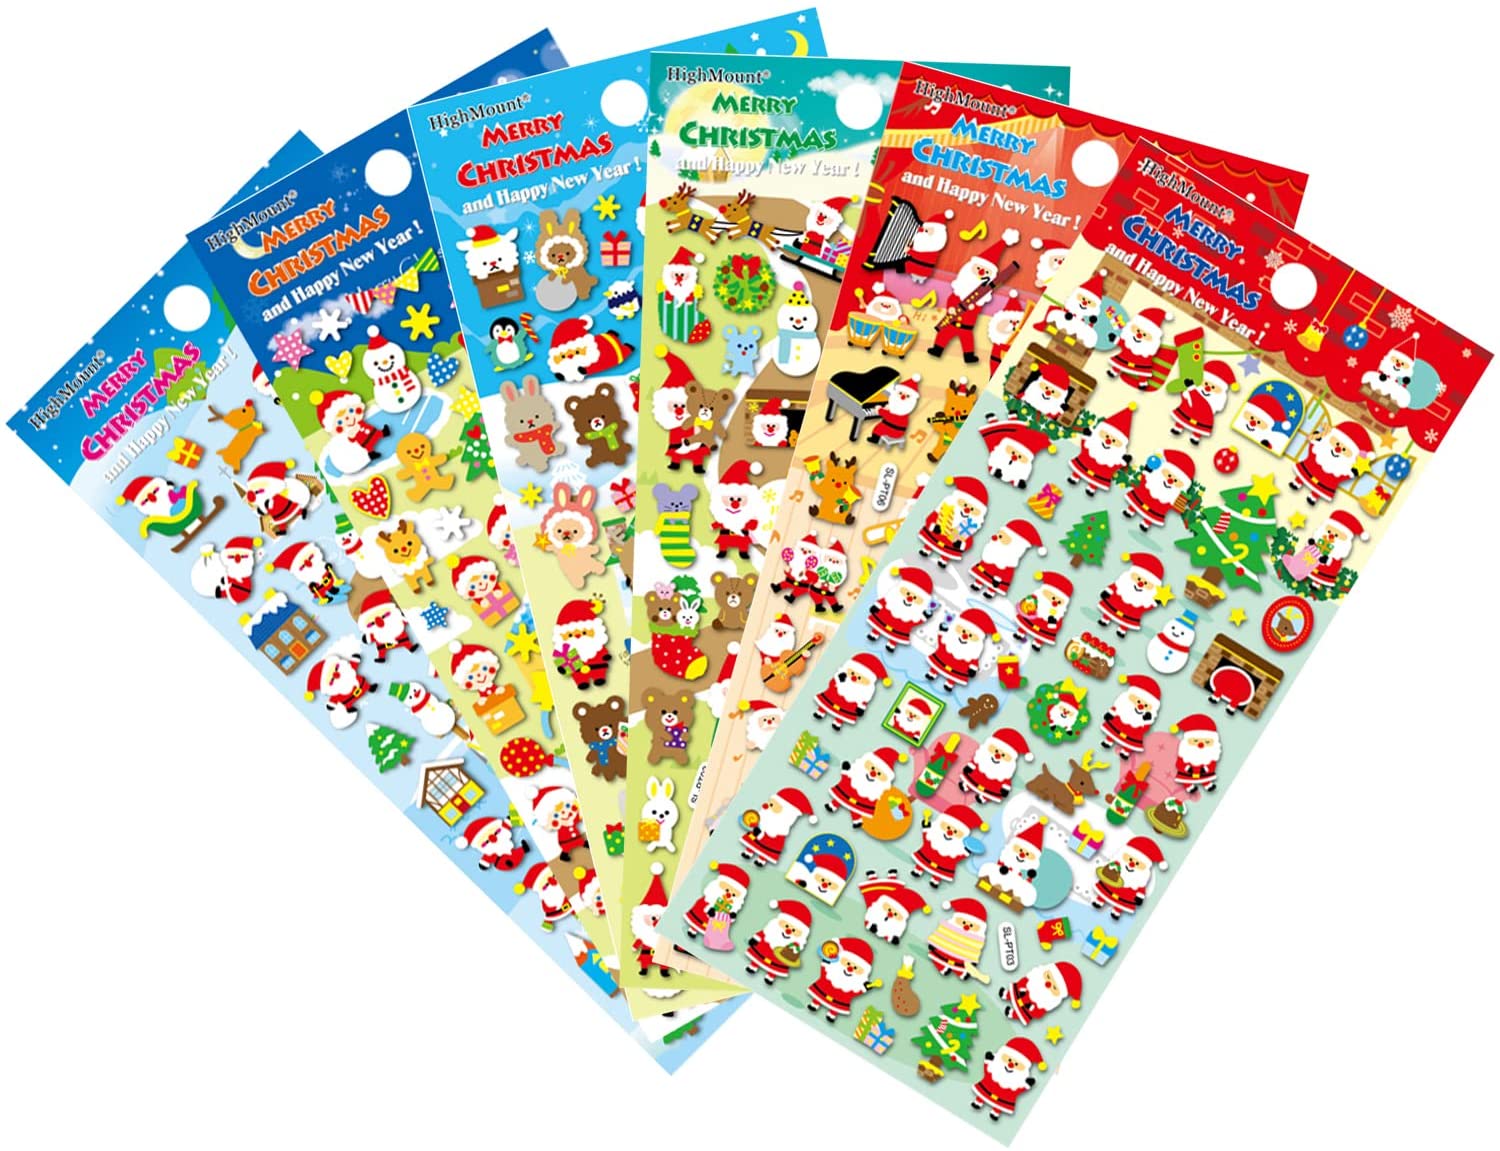 Puffy Sticker Exporter To Sell Christmas Stickers 6 Sheets With Snowman, Reindeer, Tree, Bear, Santa Claus Happy Faces Xmas Kids Stickers Decals For Toys Gifts Scarpbooking Crafts Decorations - 300 Stickers